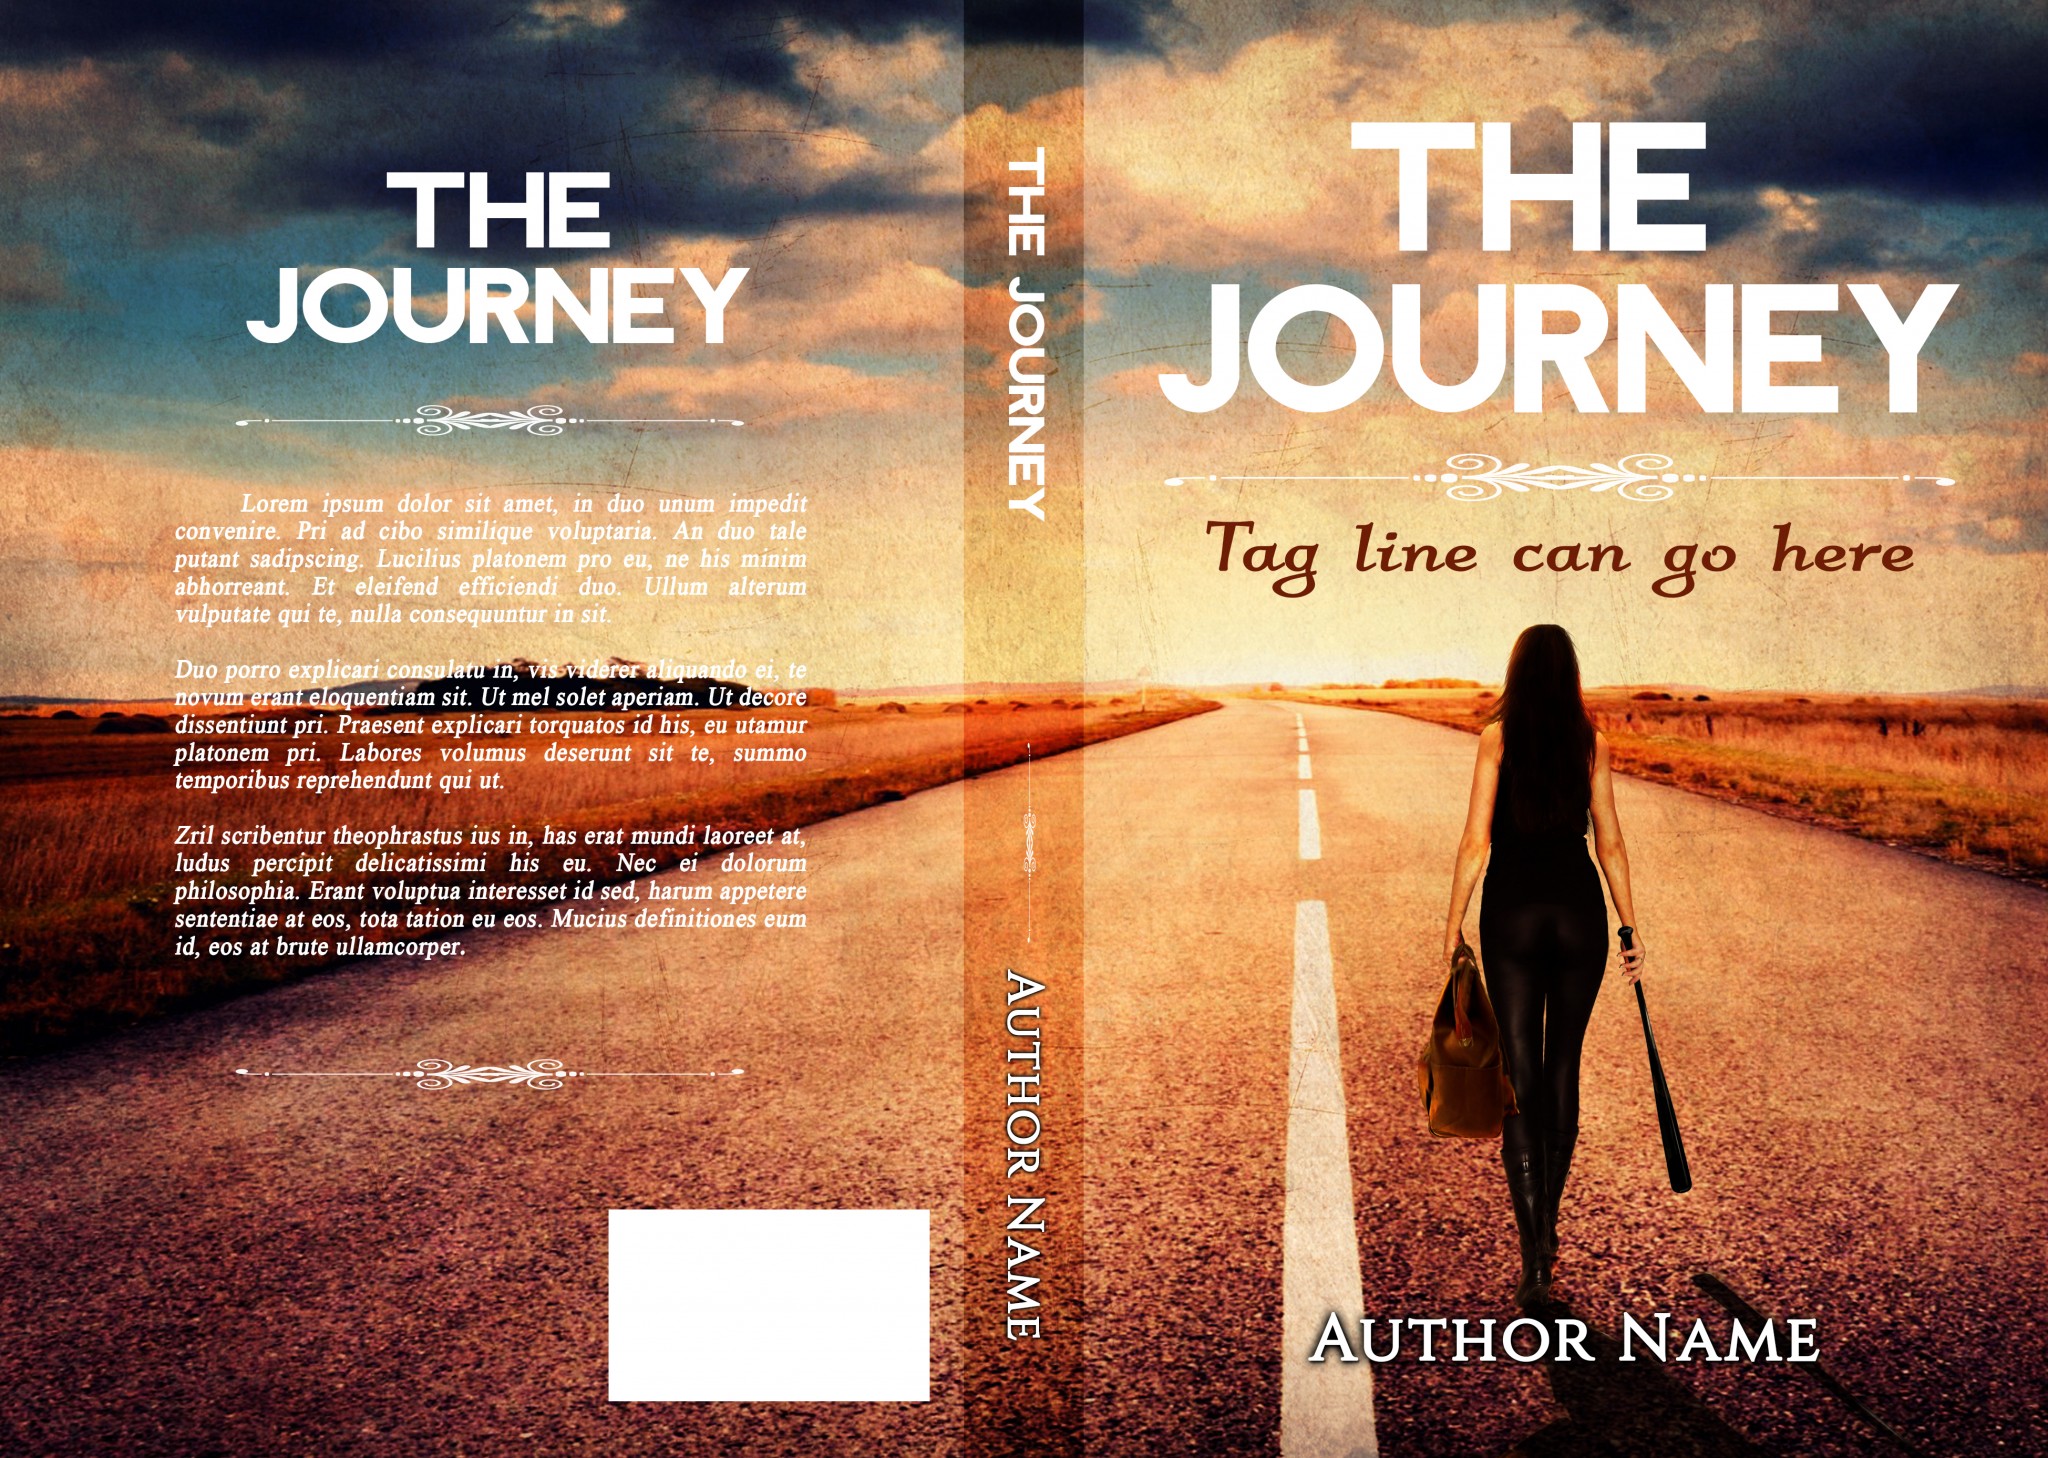 the journey book images